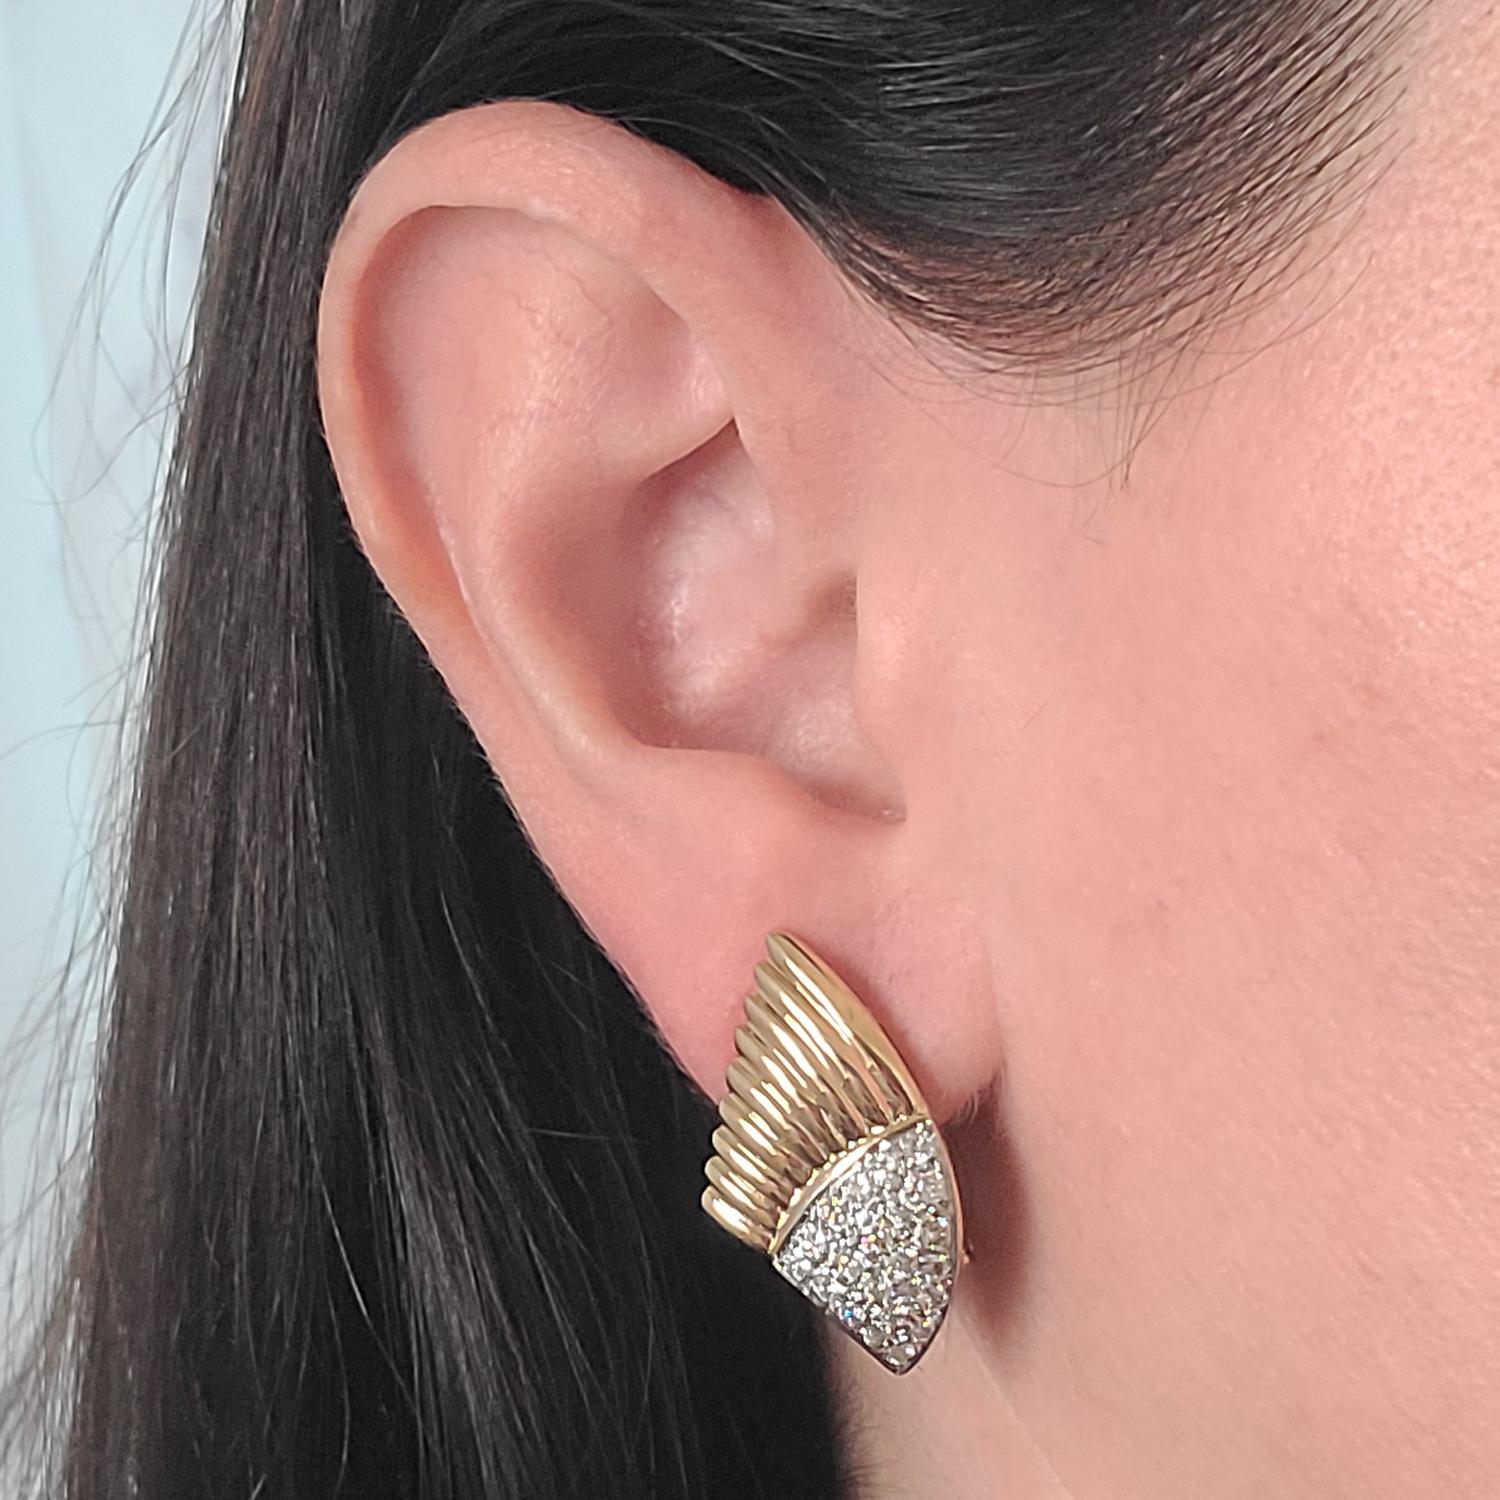 14 Karat Yellow Gold Earrings Featuring A Pave Ribbed Wing Design. 44 Round Brilliant Cut Diamonds of VS Clarity and G/H Color Total Approximately 1.00 Carat. Pierced Post with Supportive Omega Clip Back. Finished Weight Is 8.2 Grams.